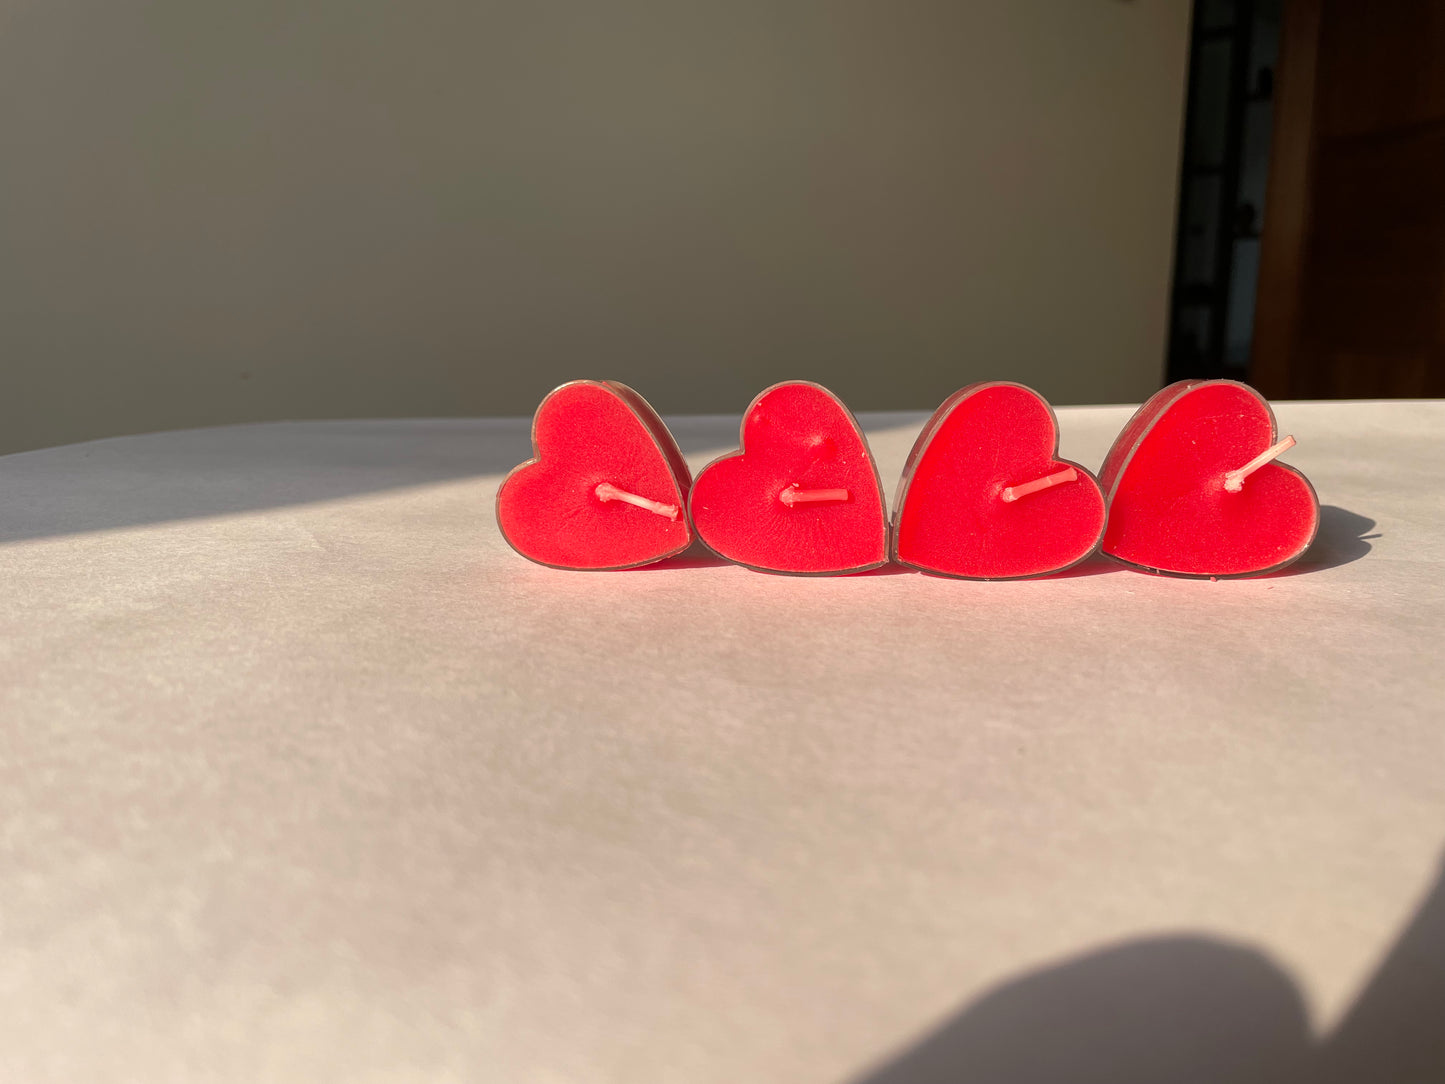 8-Piece Set of Heart-Shaped Candles - Ideal for Couples Seeking Lasting Fragrance